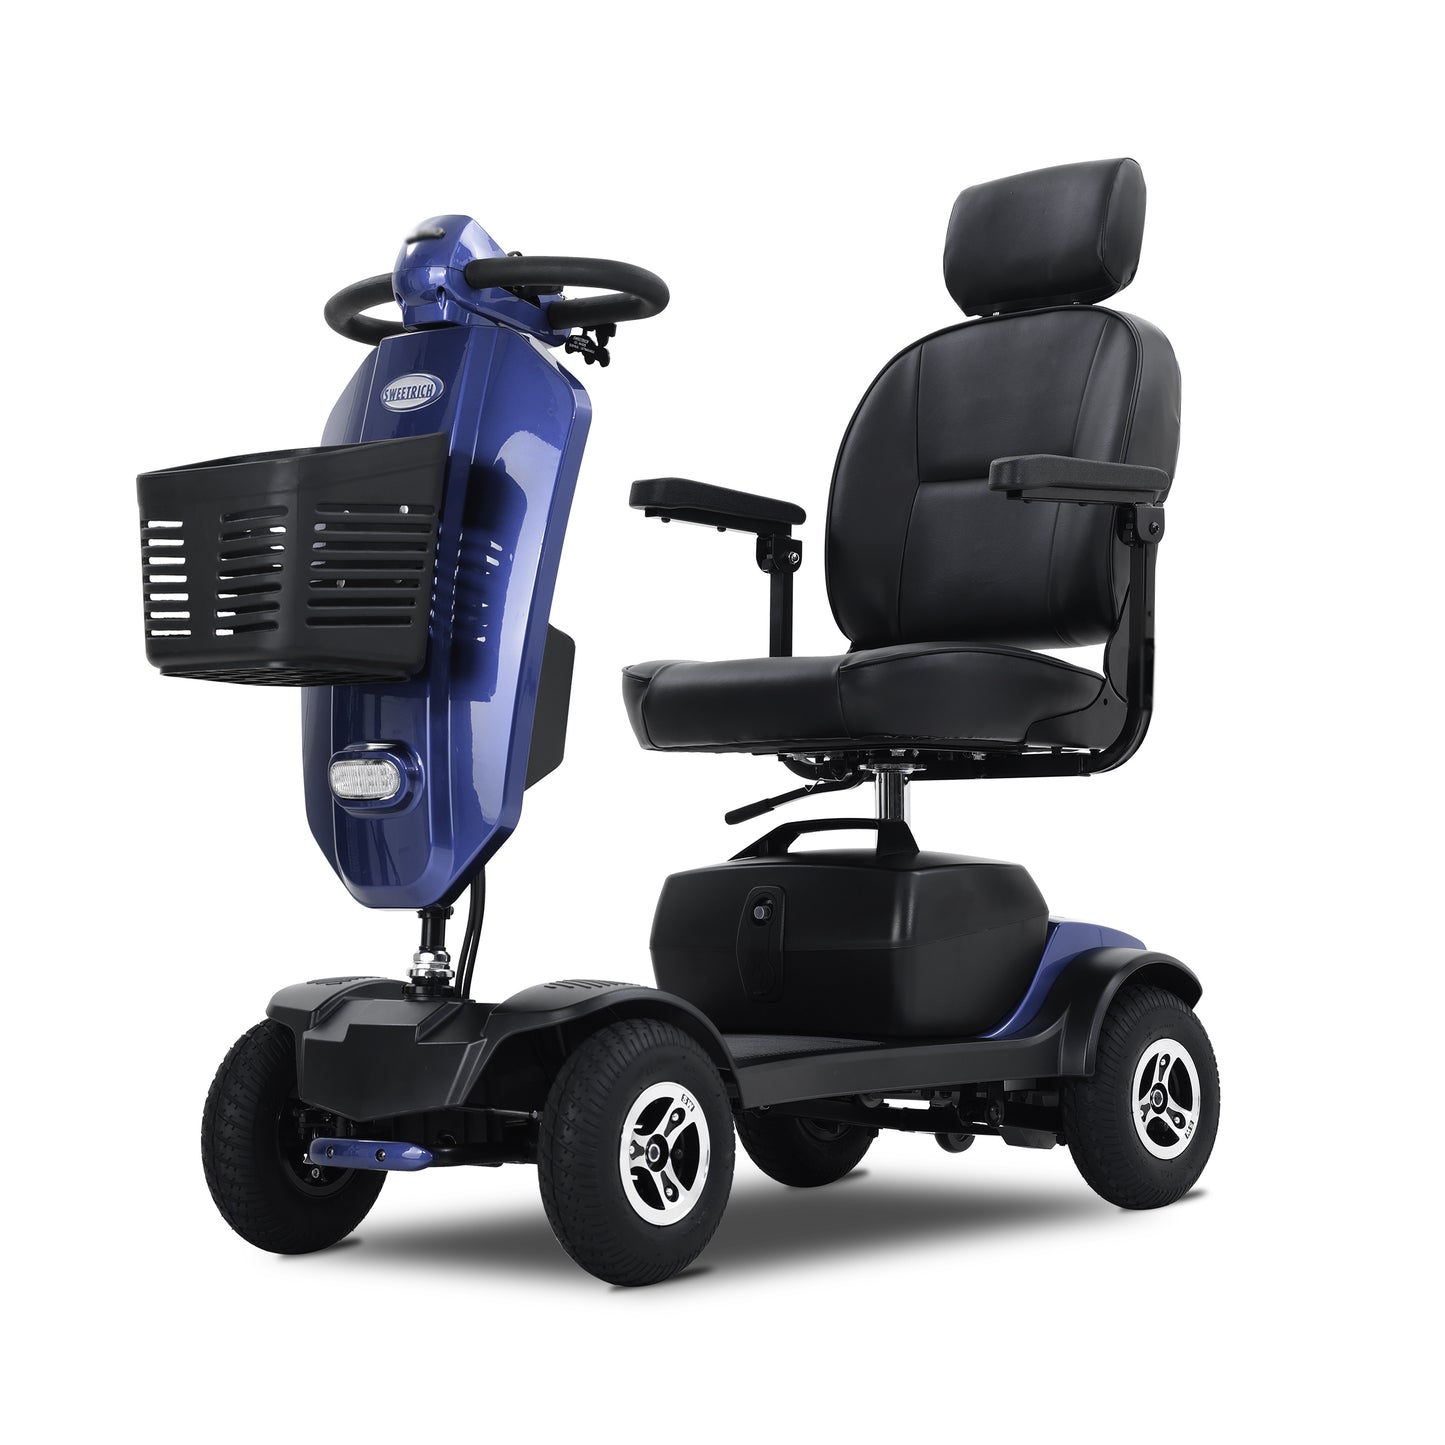 Metro Max Plus Mobility Scooter - Blue